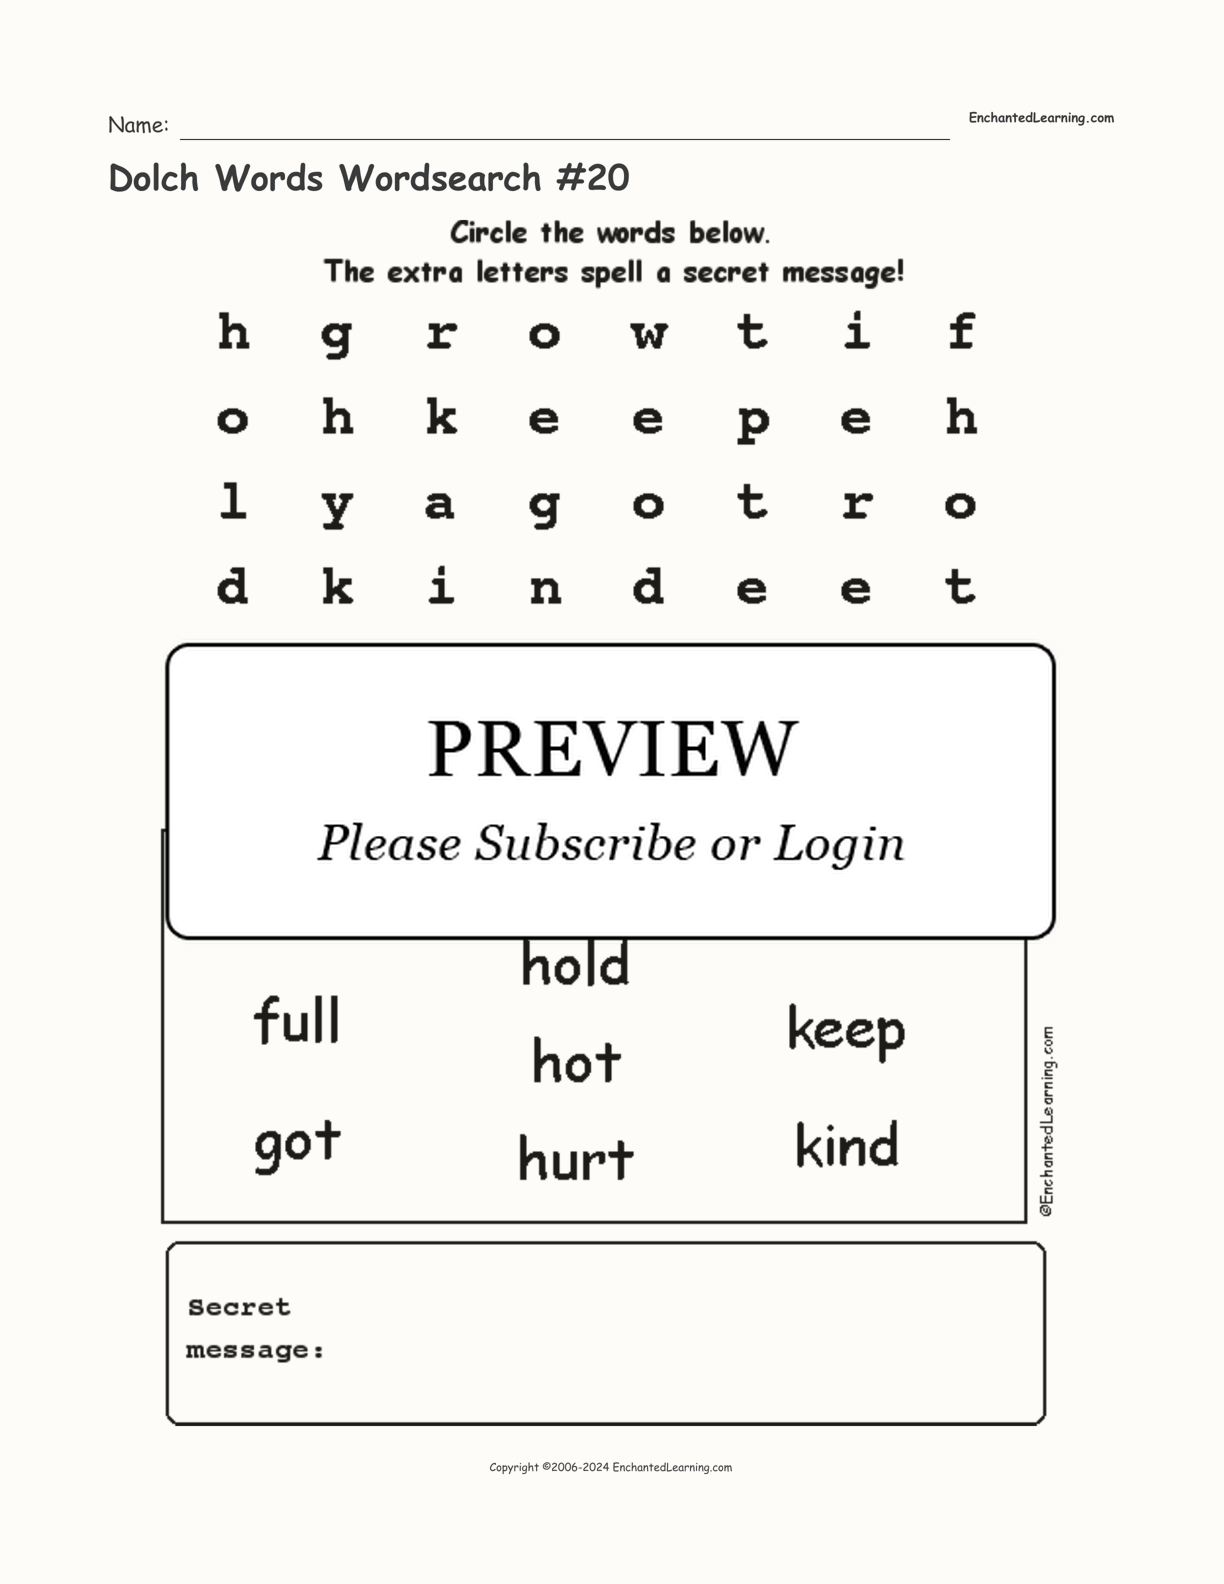 Dolch Words Wordsearch #20 interactive worksheet page 1